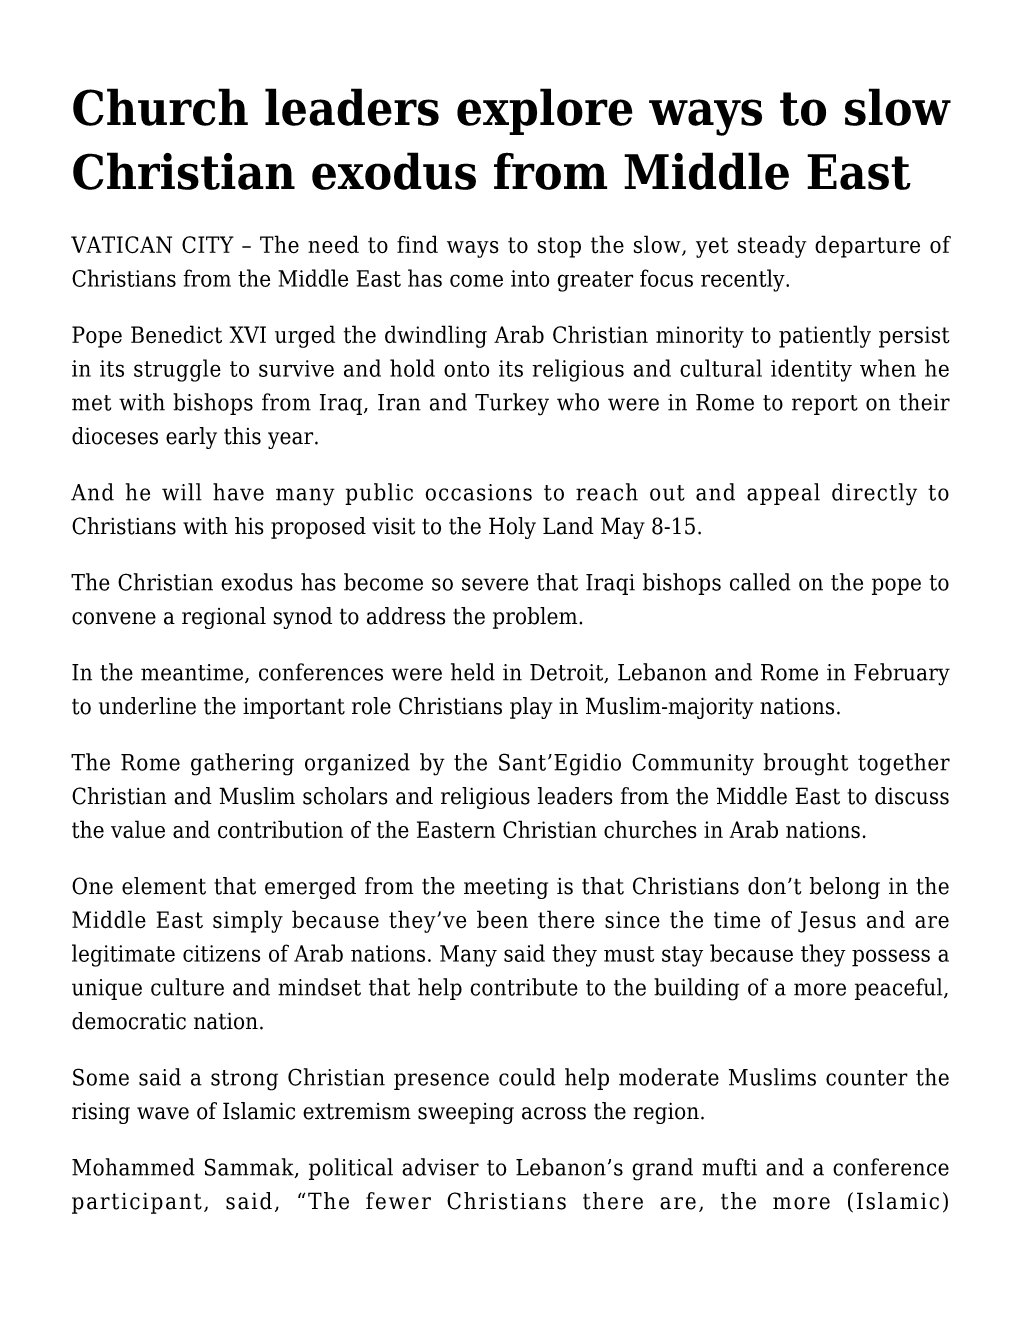 Church Leaders Explore Ways to Slow Christian Exodus from Middle East